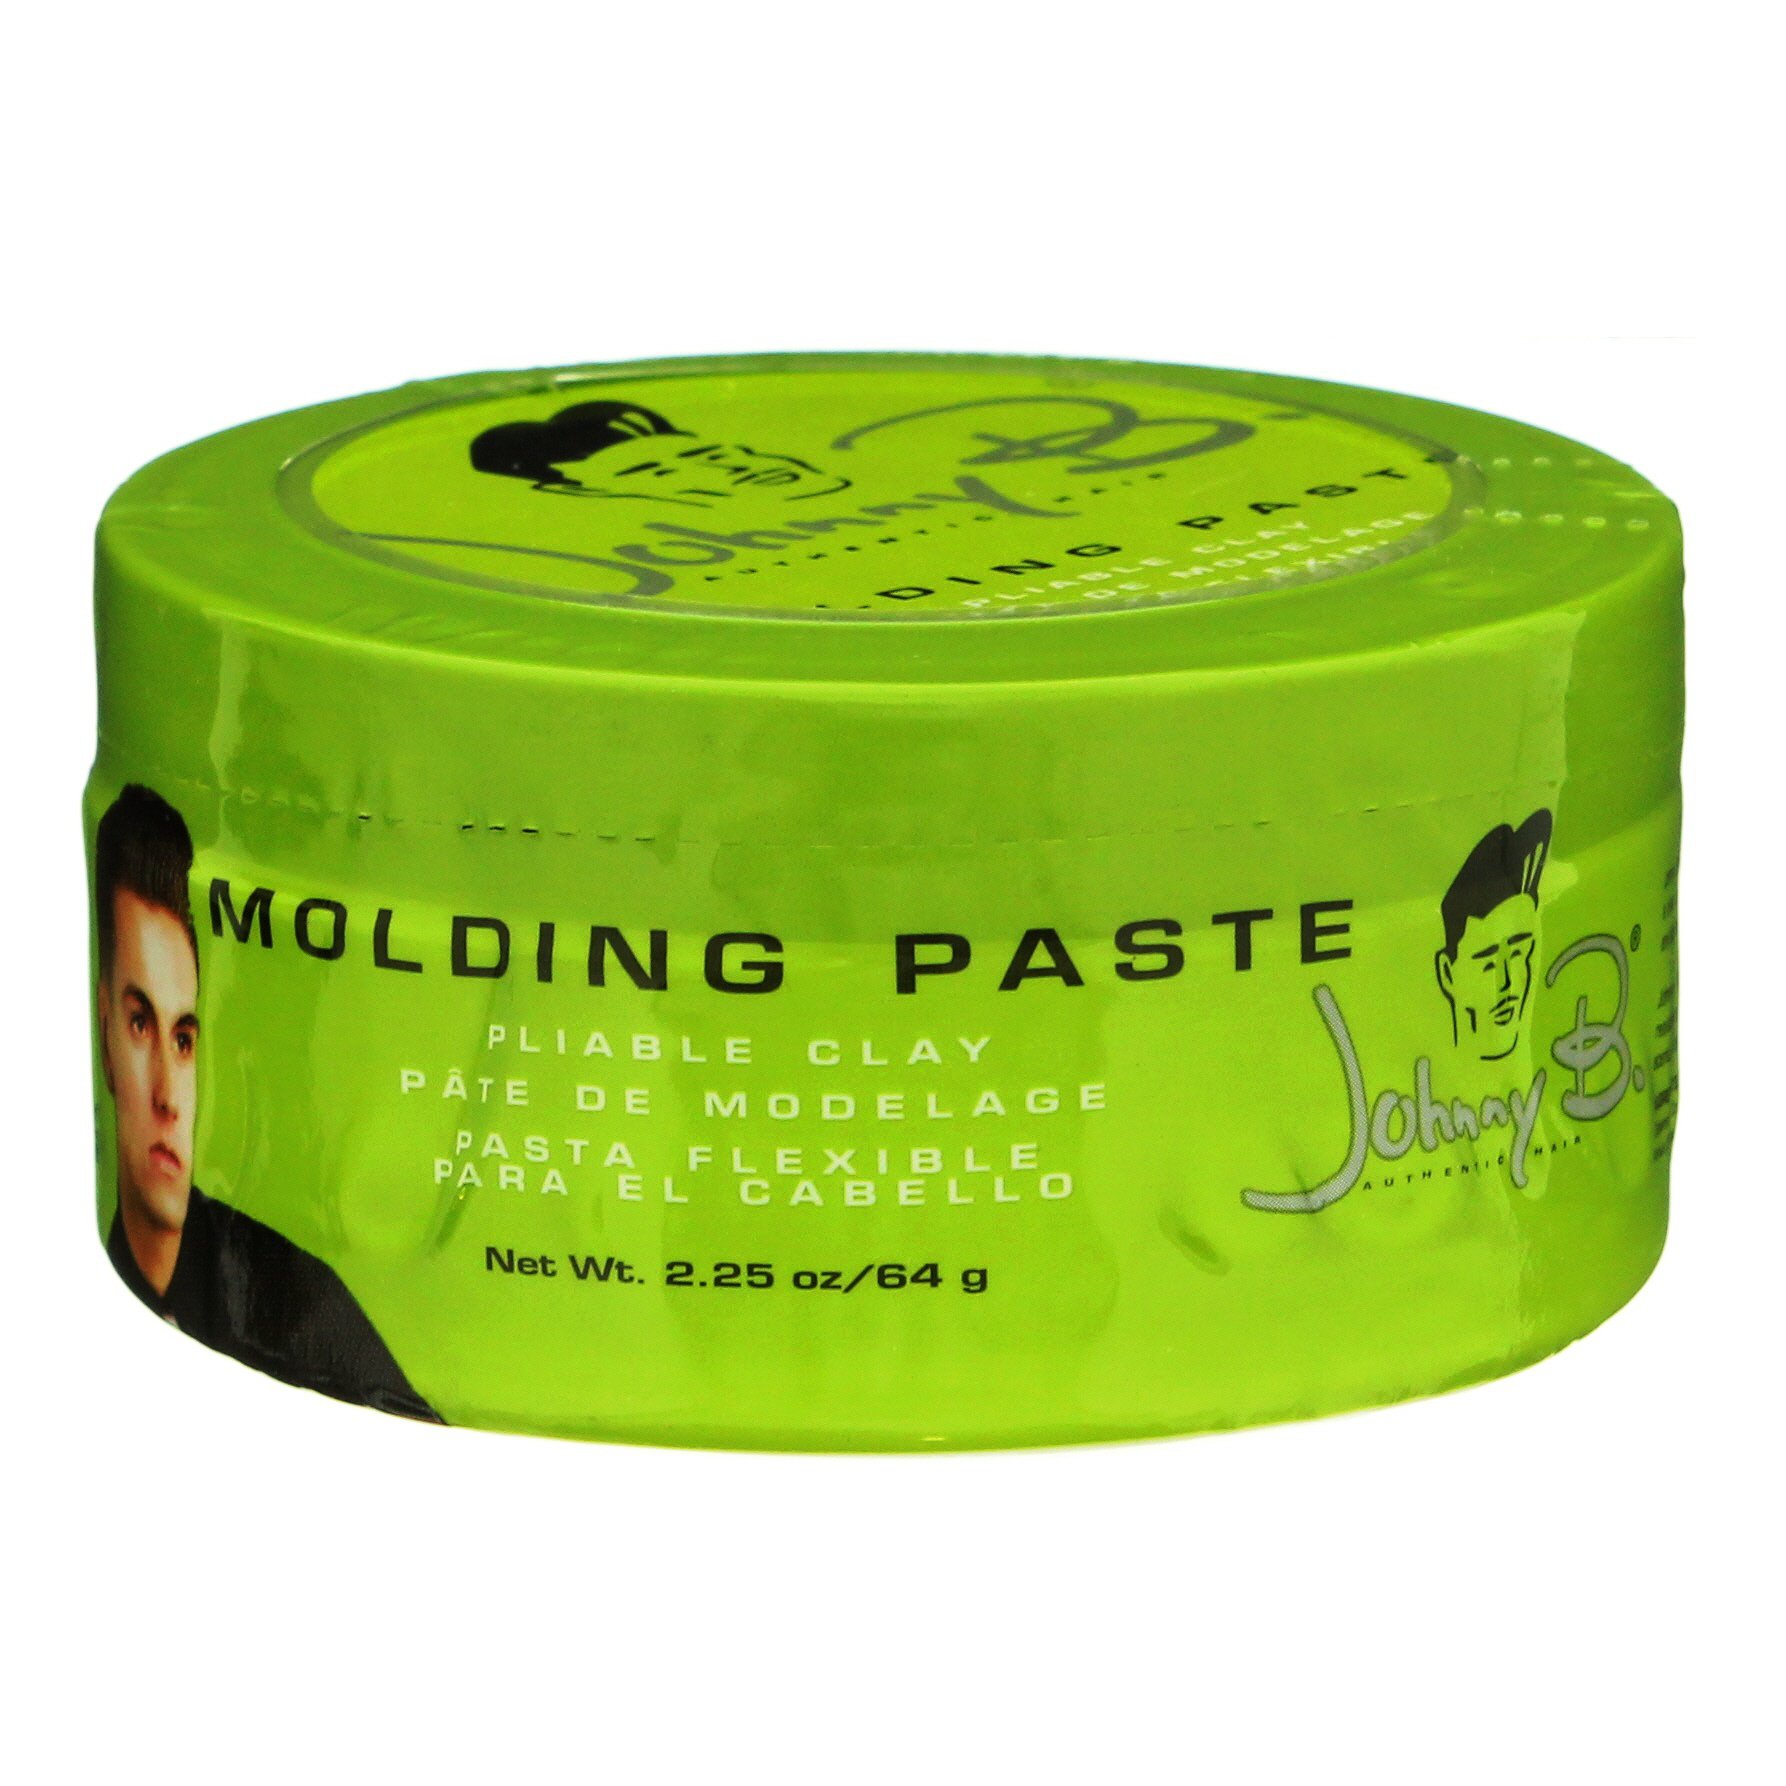 Johnny B Molding Paste - Shop Styling Products & Treatments at H-E-B